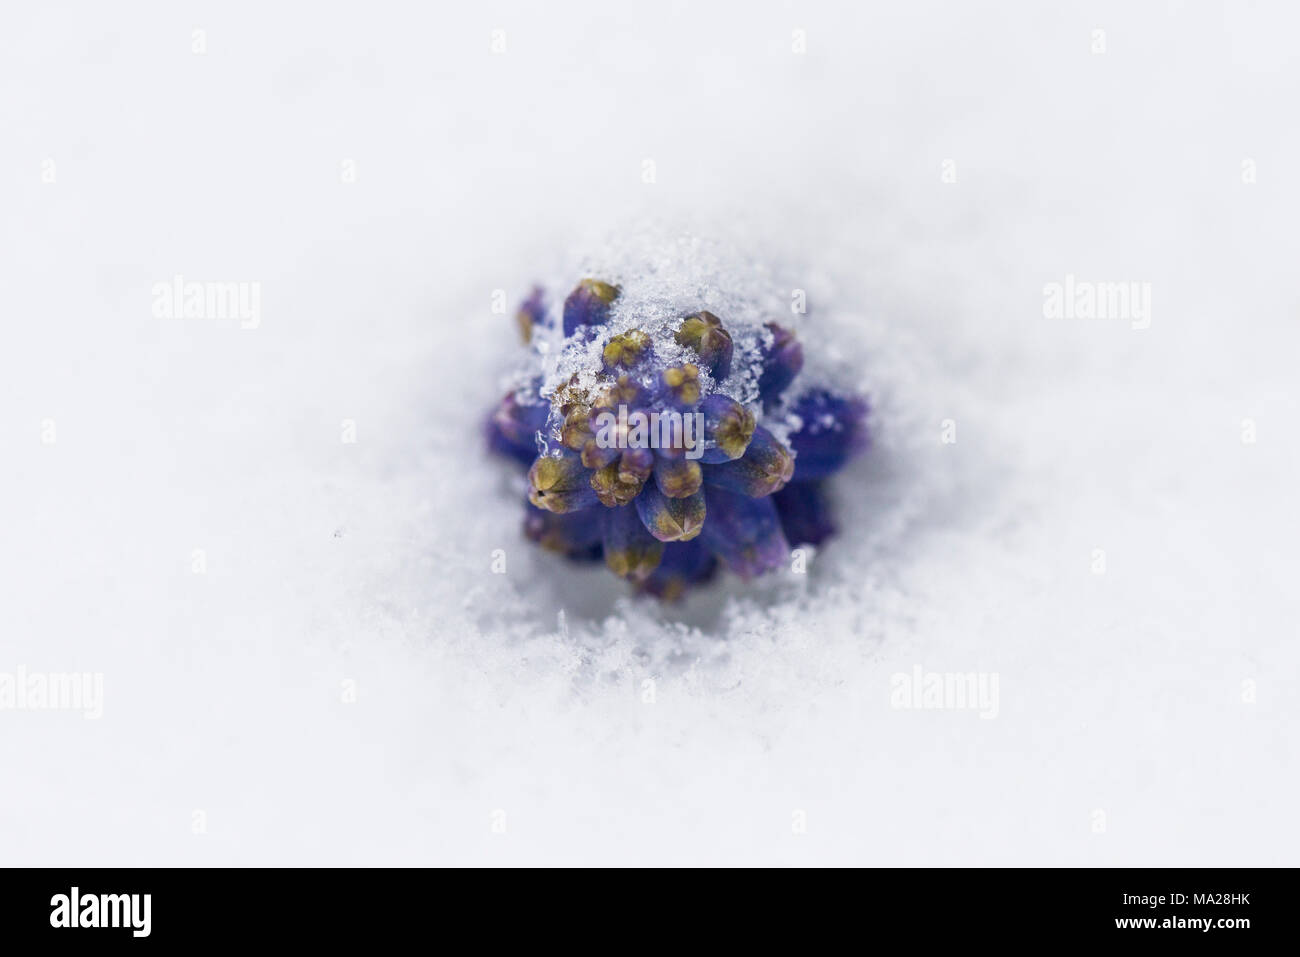 A grape hyacinth (Muscari) poking out from beneath snow Stock Photo